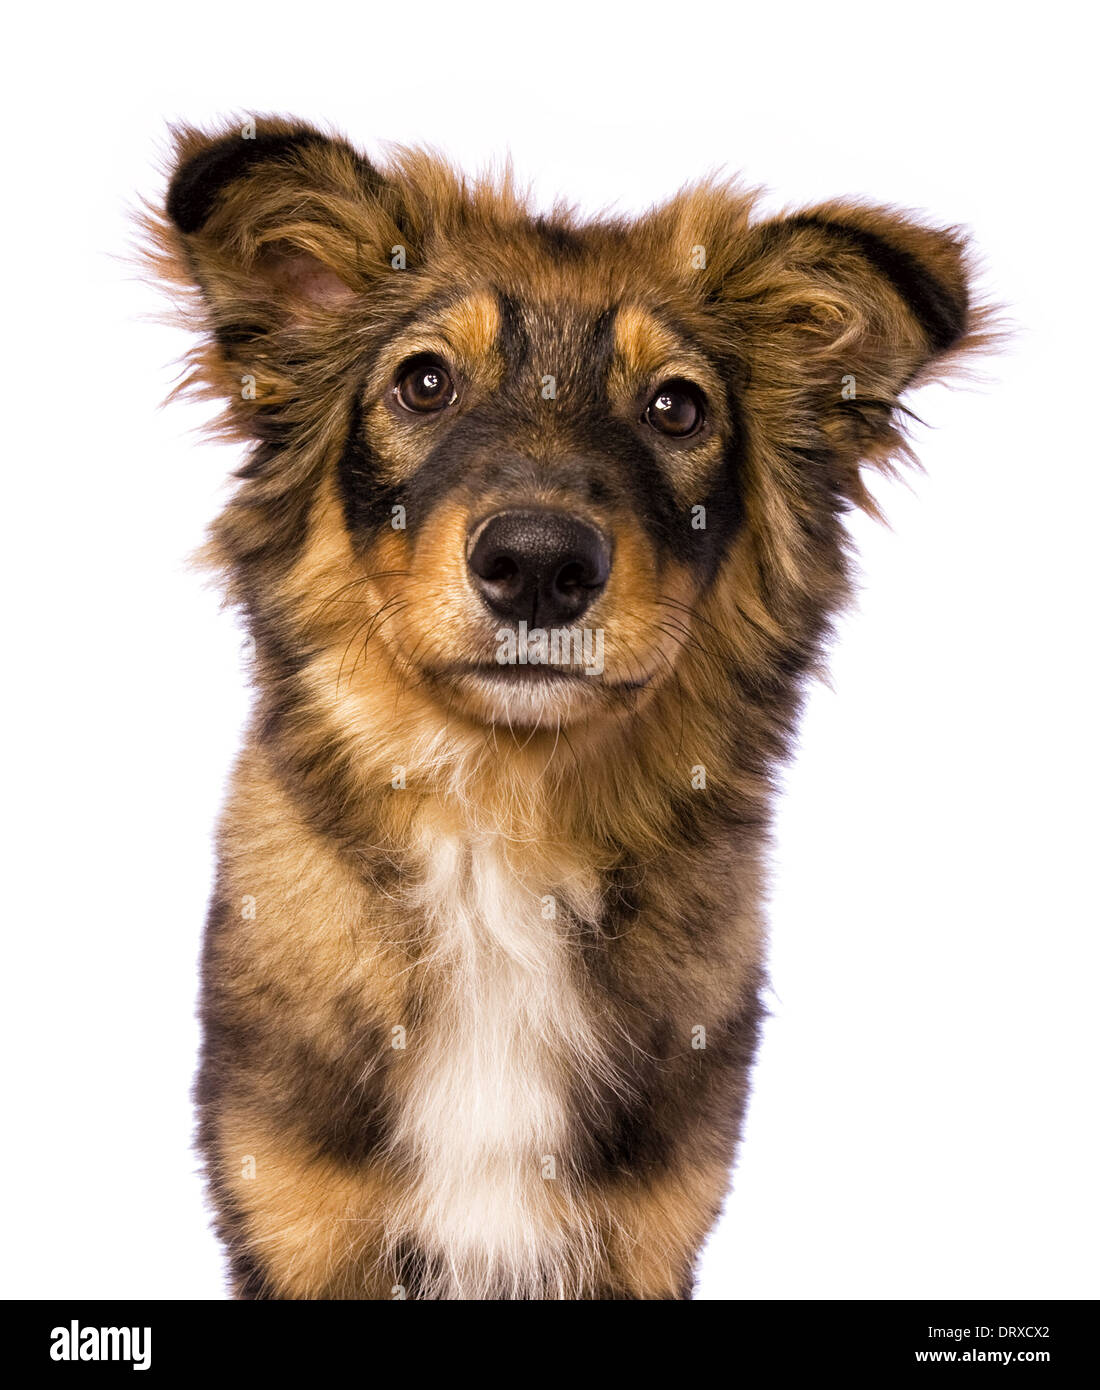 Cute shepherd mix puppy dog head shot with rings round eyes isolated on white Stock Photo